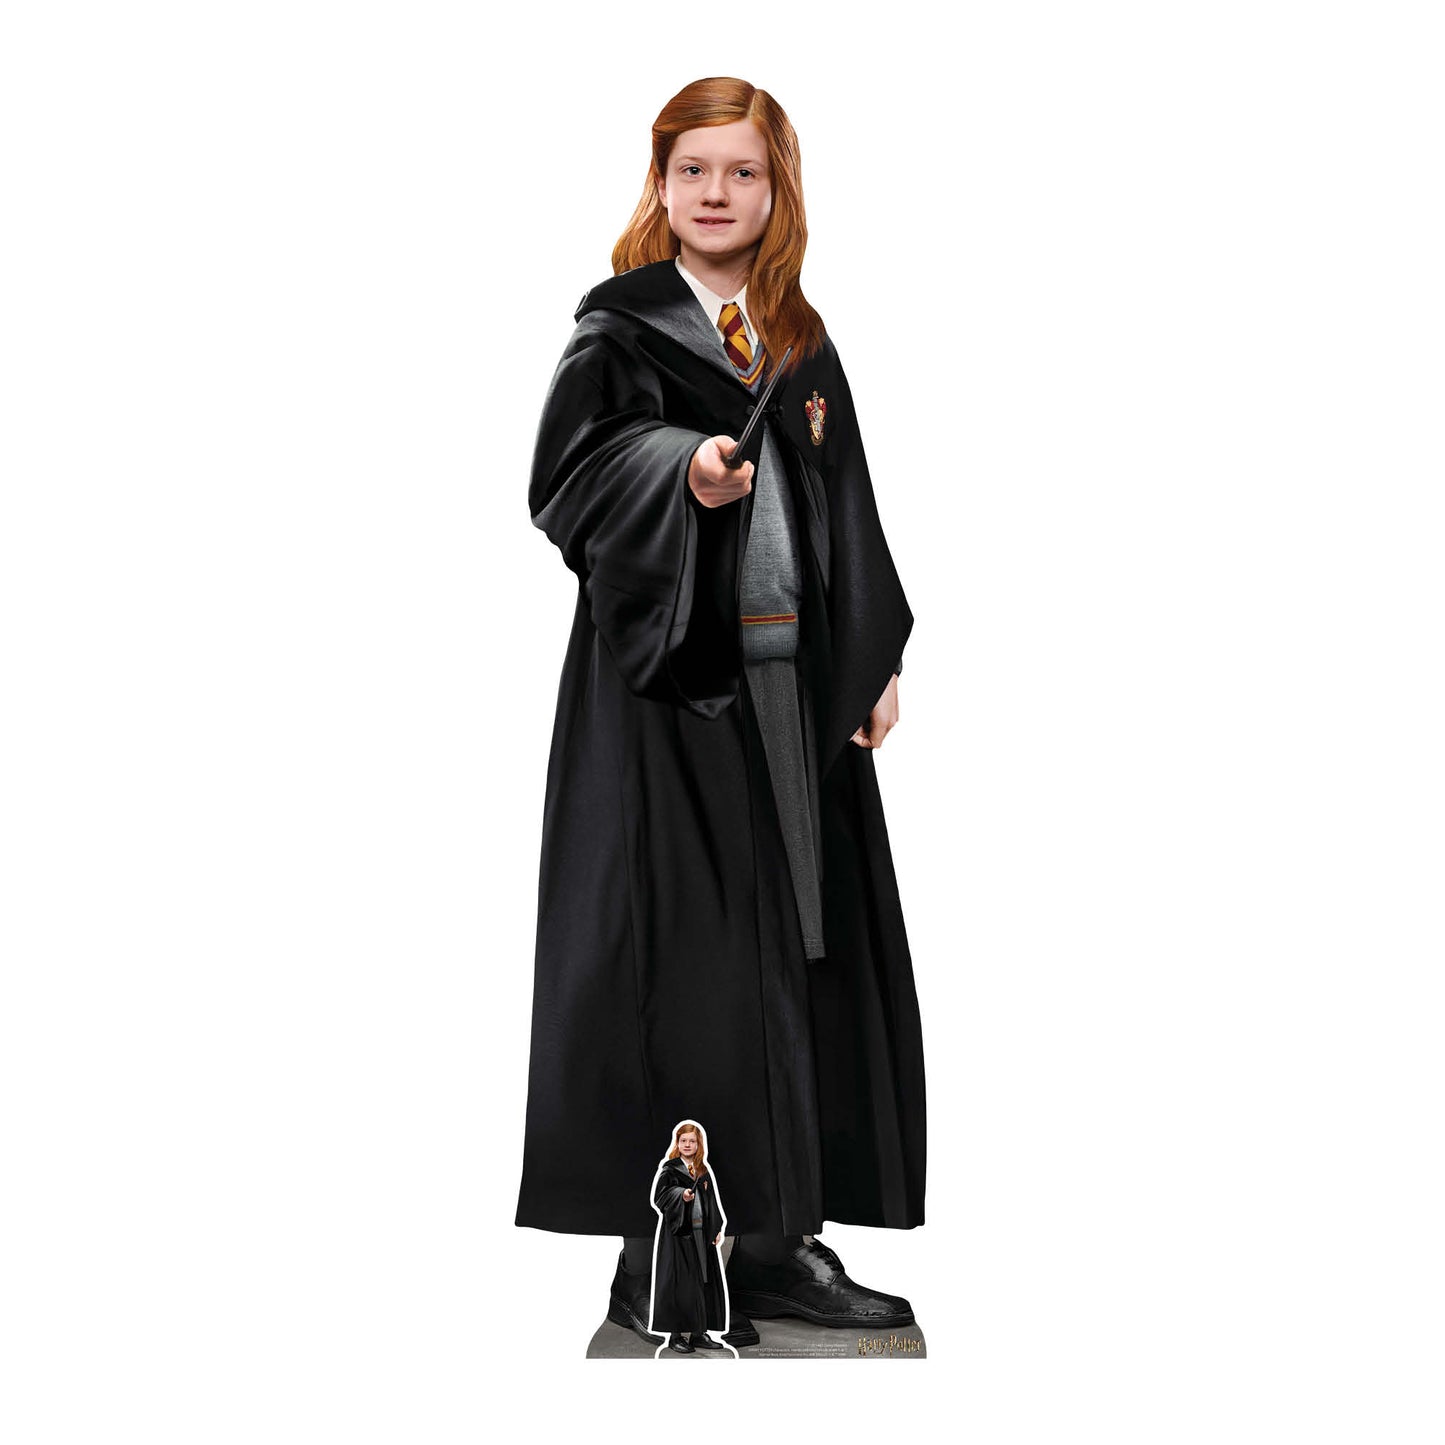 SC1482 Ginny Weasley Harry Potter Character Cardboard Cut Out Height 168cm